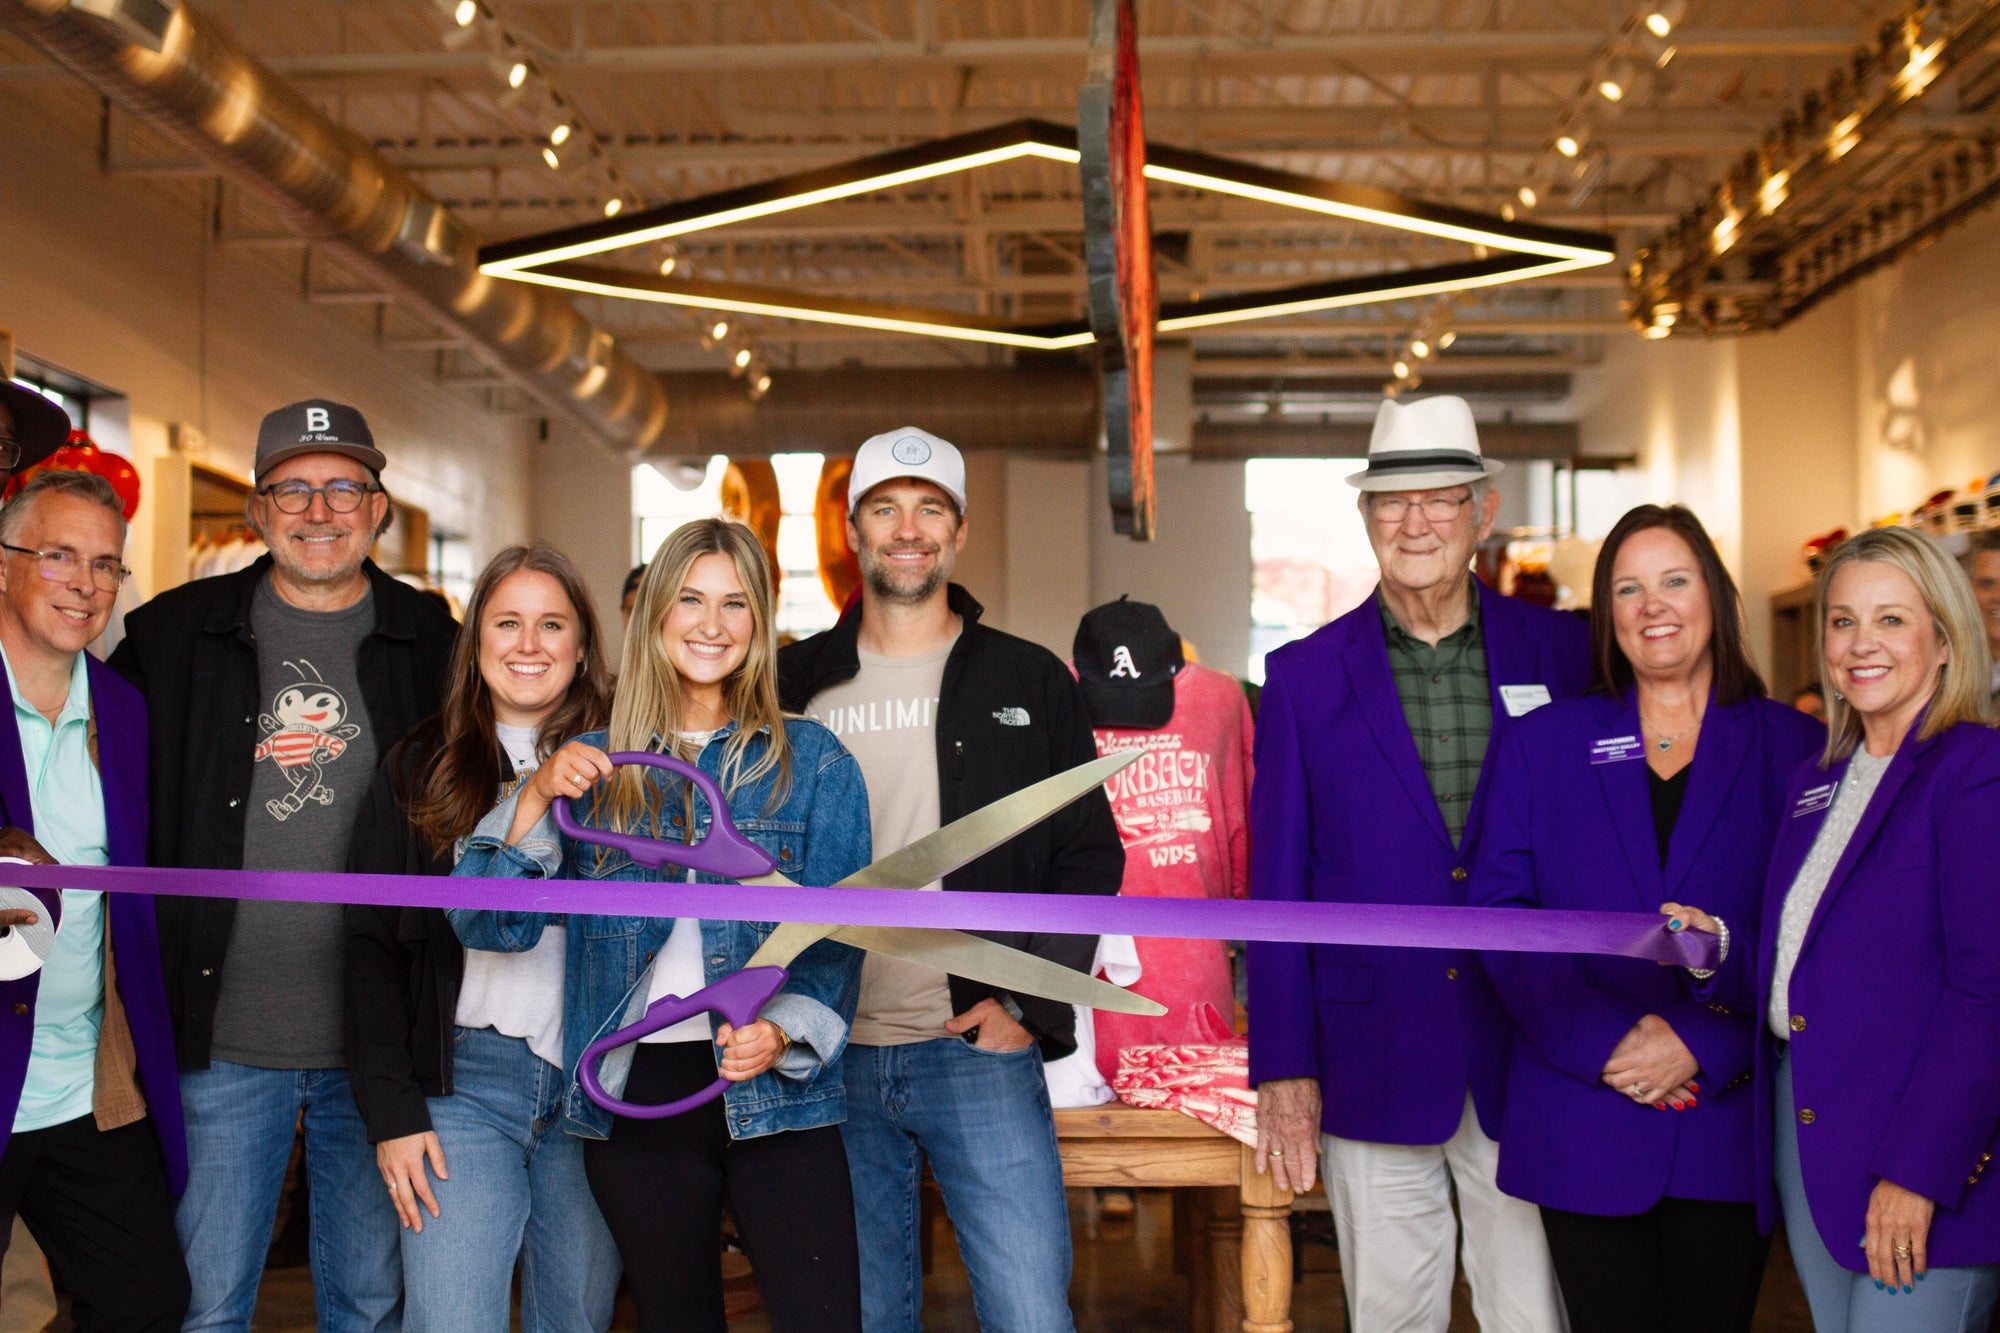 A Double Celebration: 30 Years of B-Unlimited and the Grand Opening of Our NEW Fayetteville Retail Store!